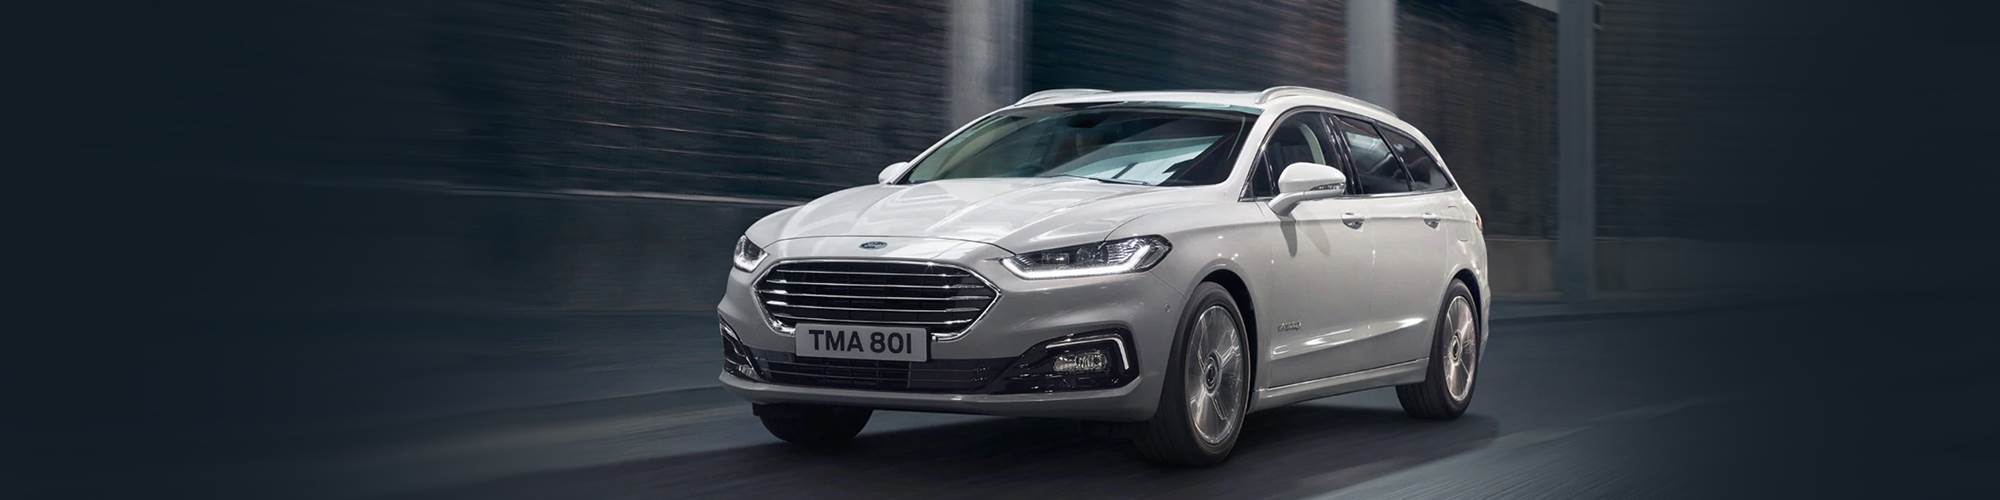 New Ford Mondeo car in white